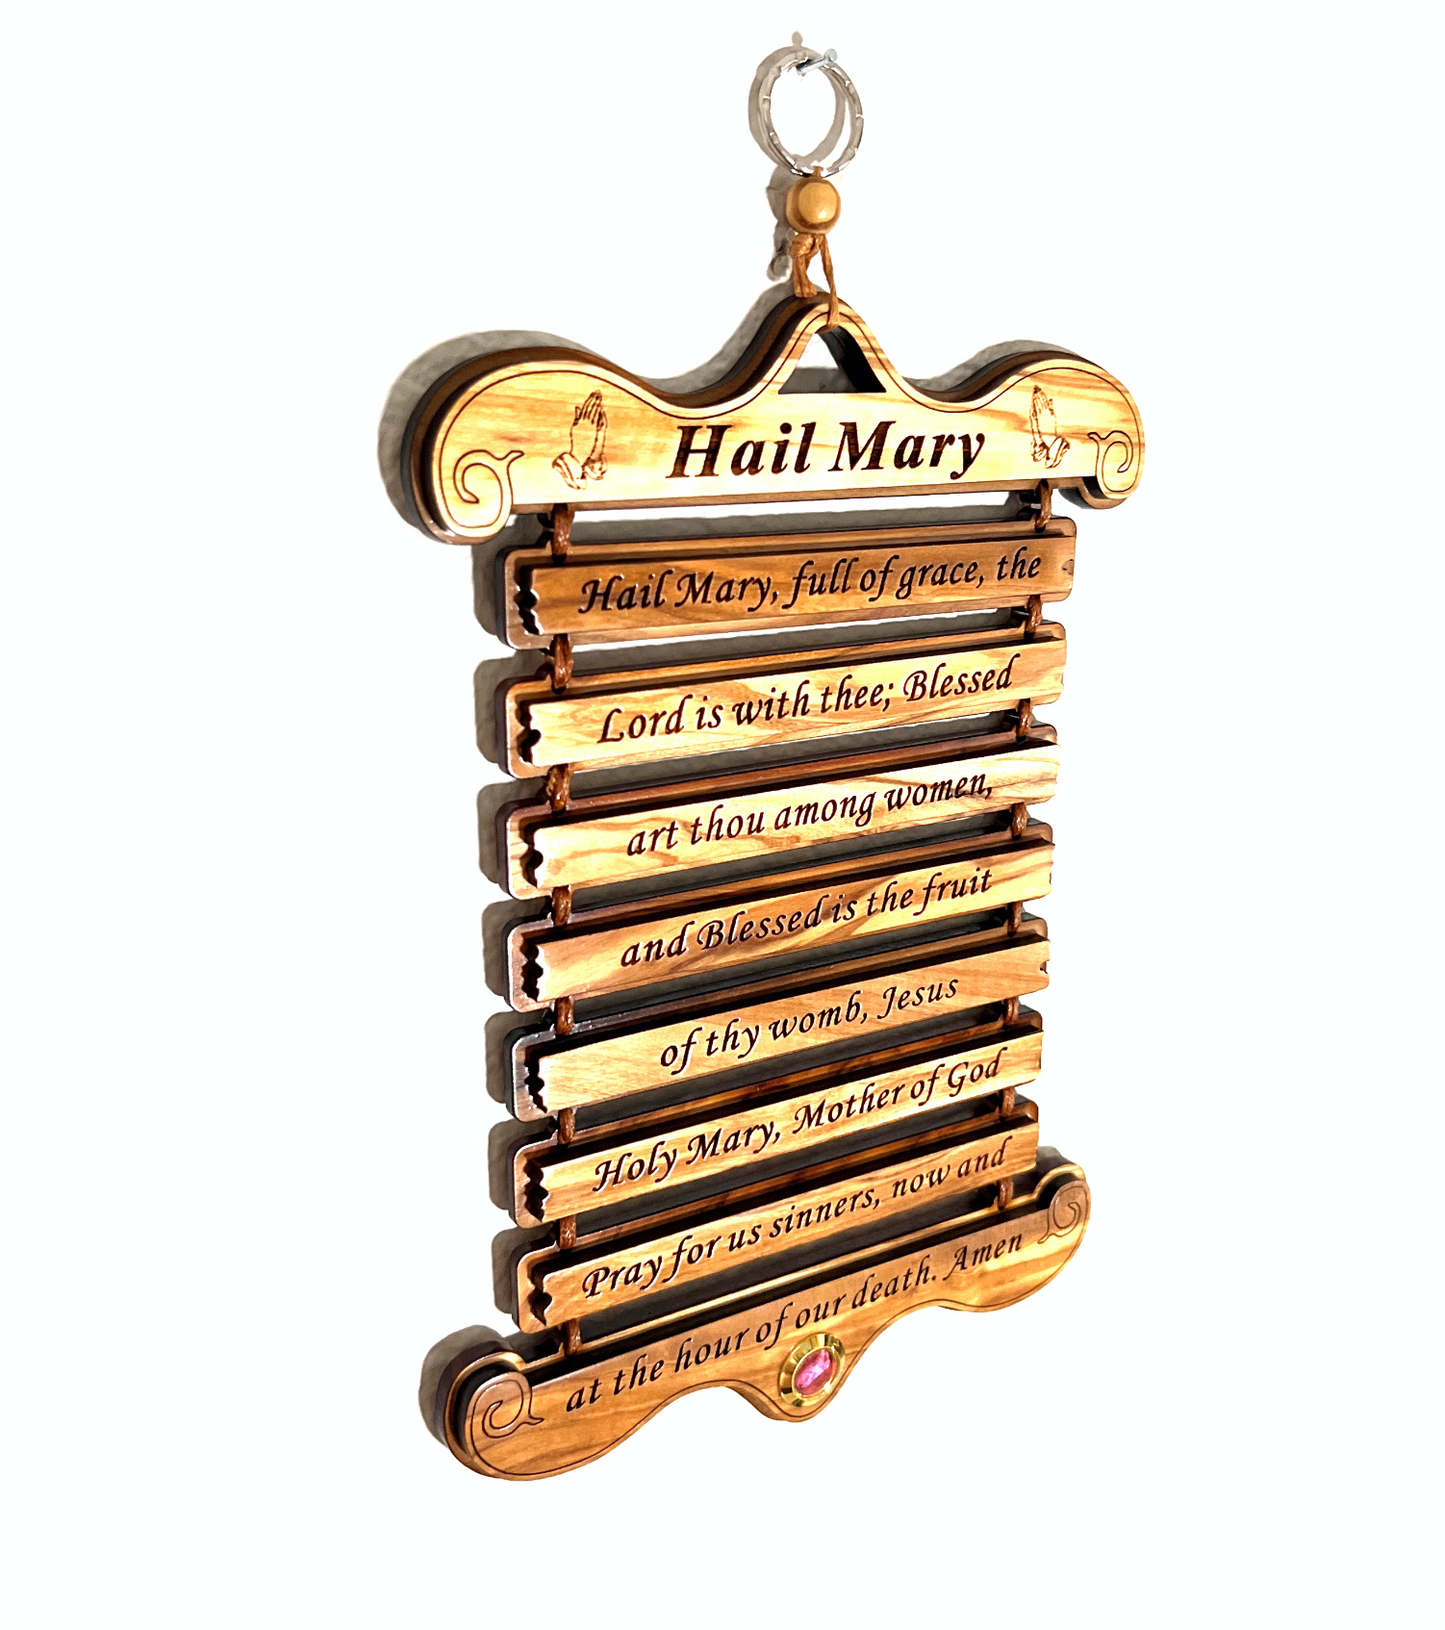 Hail Mary Prayer Engraved Wall Hanging in Olive Wood From Holy Land with Incense in Glass Capsule 